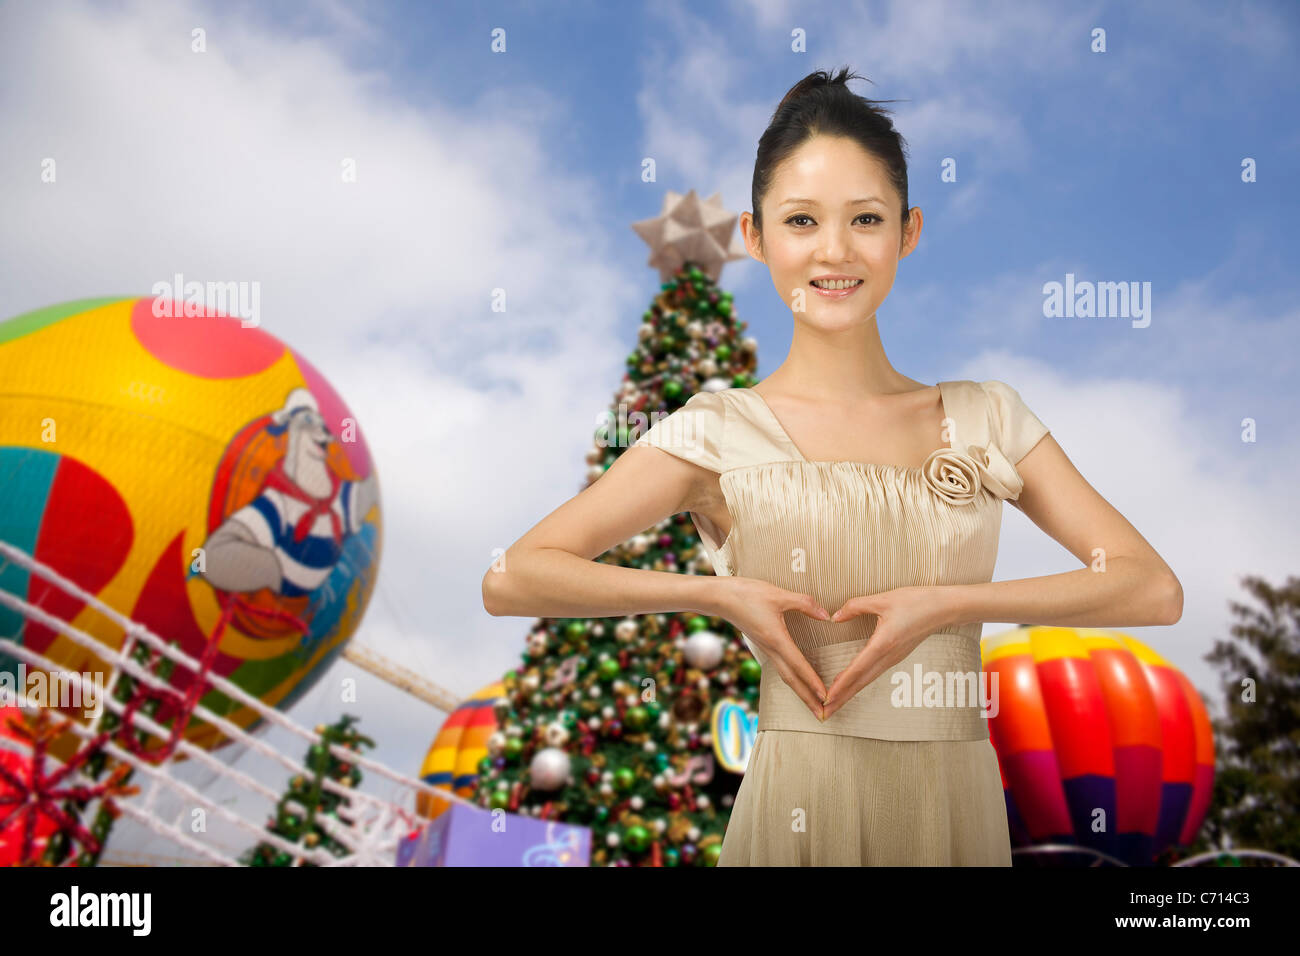 Computer-generated woman and background Stock Photo